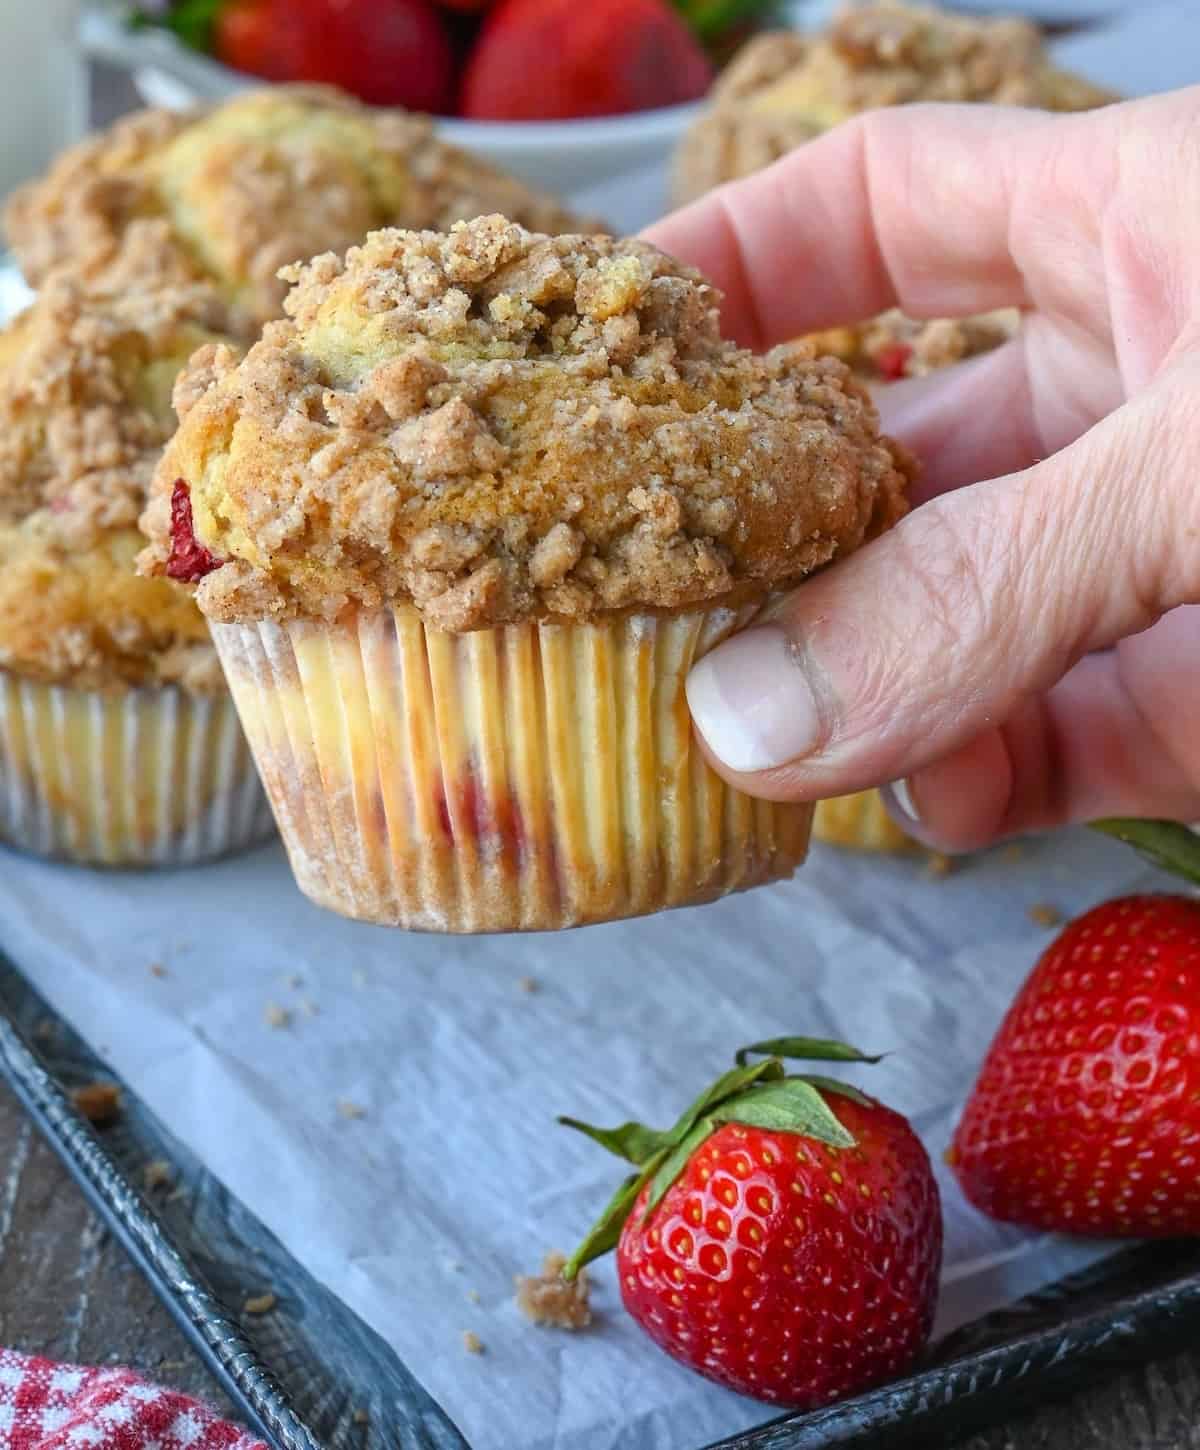 Strawberry cheesecake muffin being picked up.